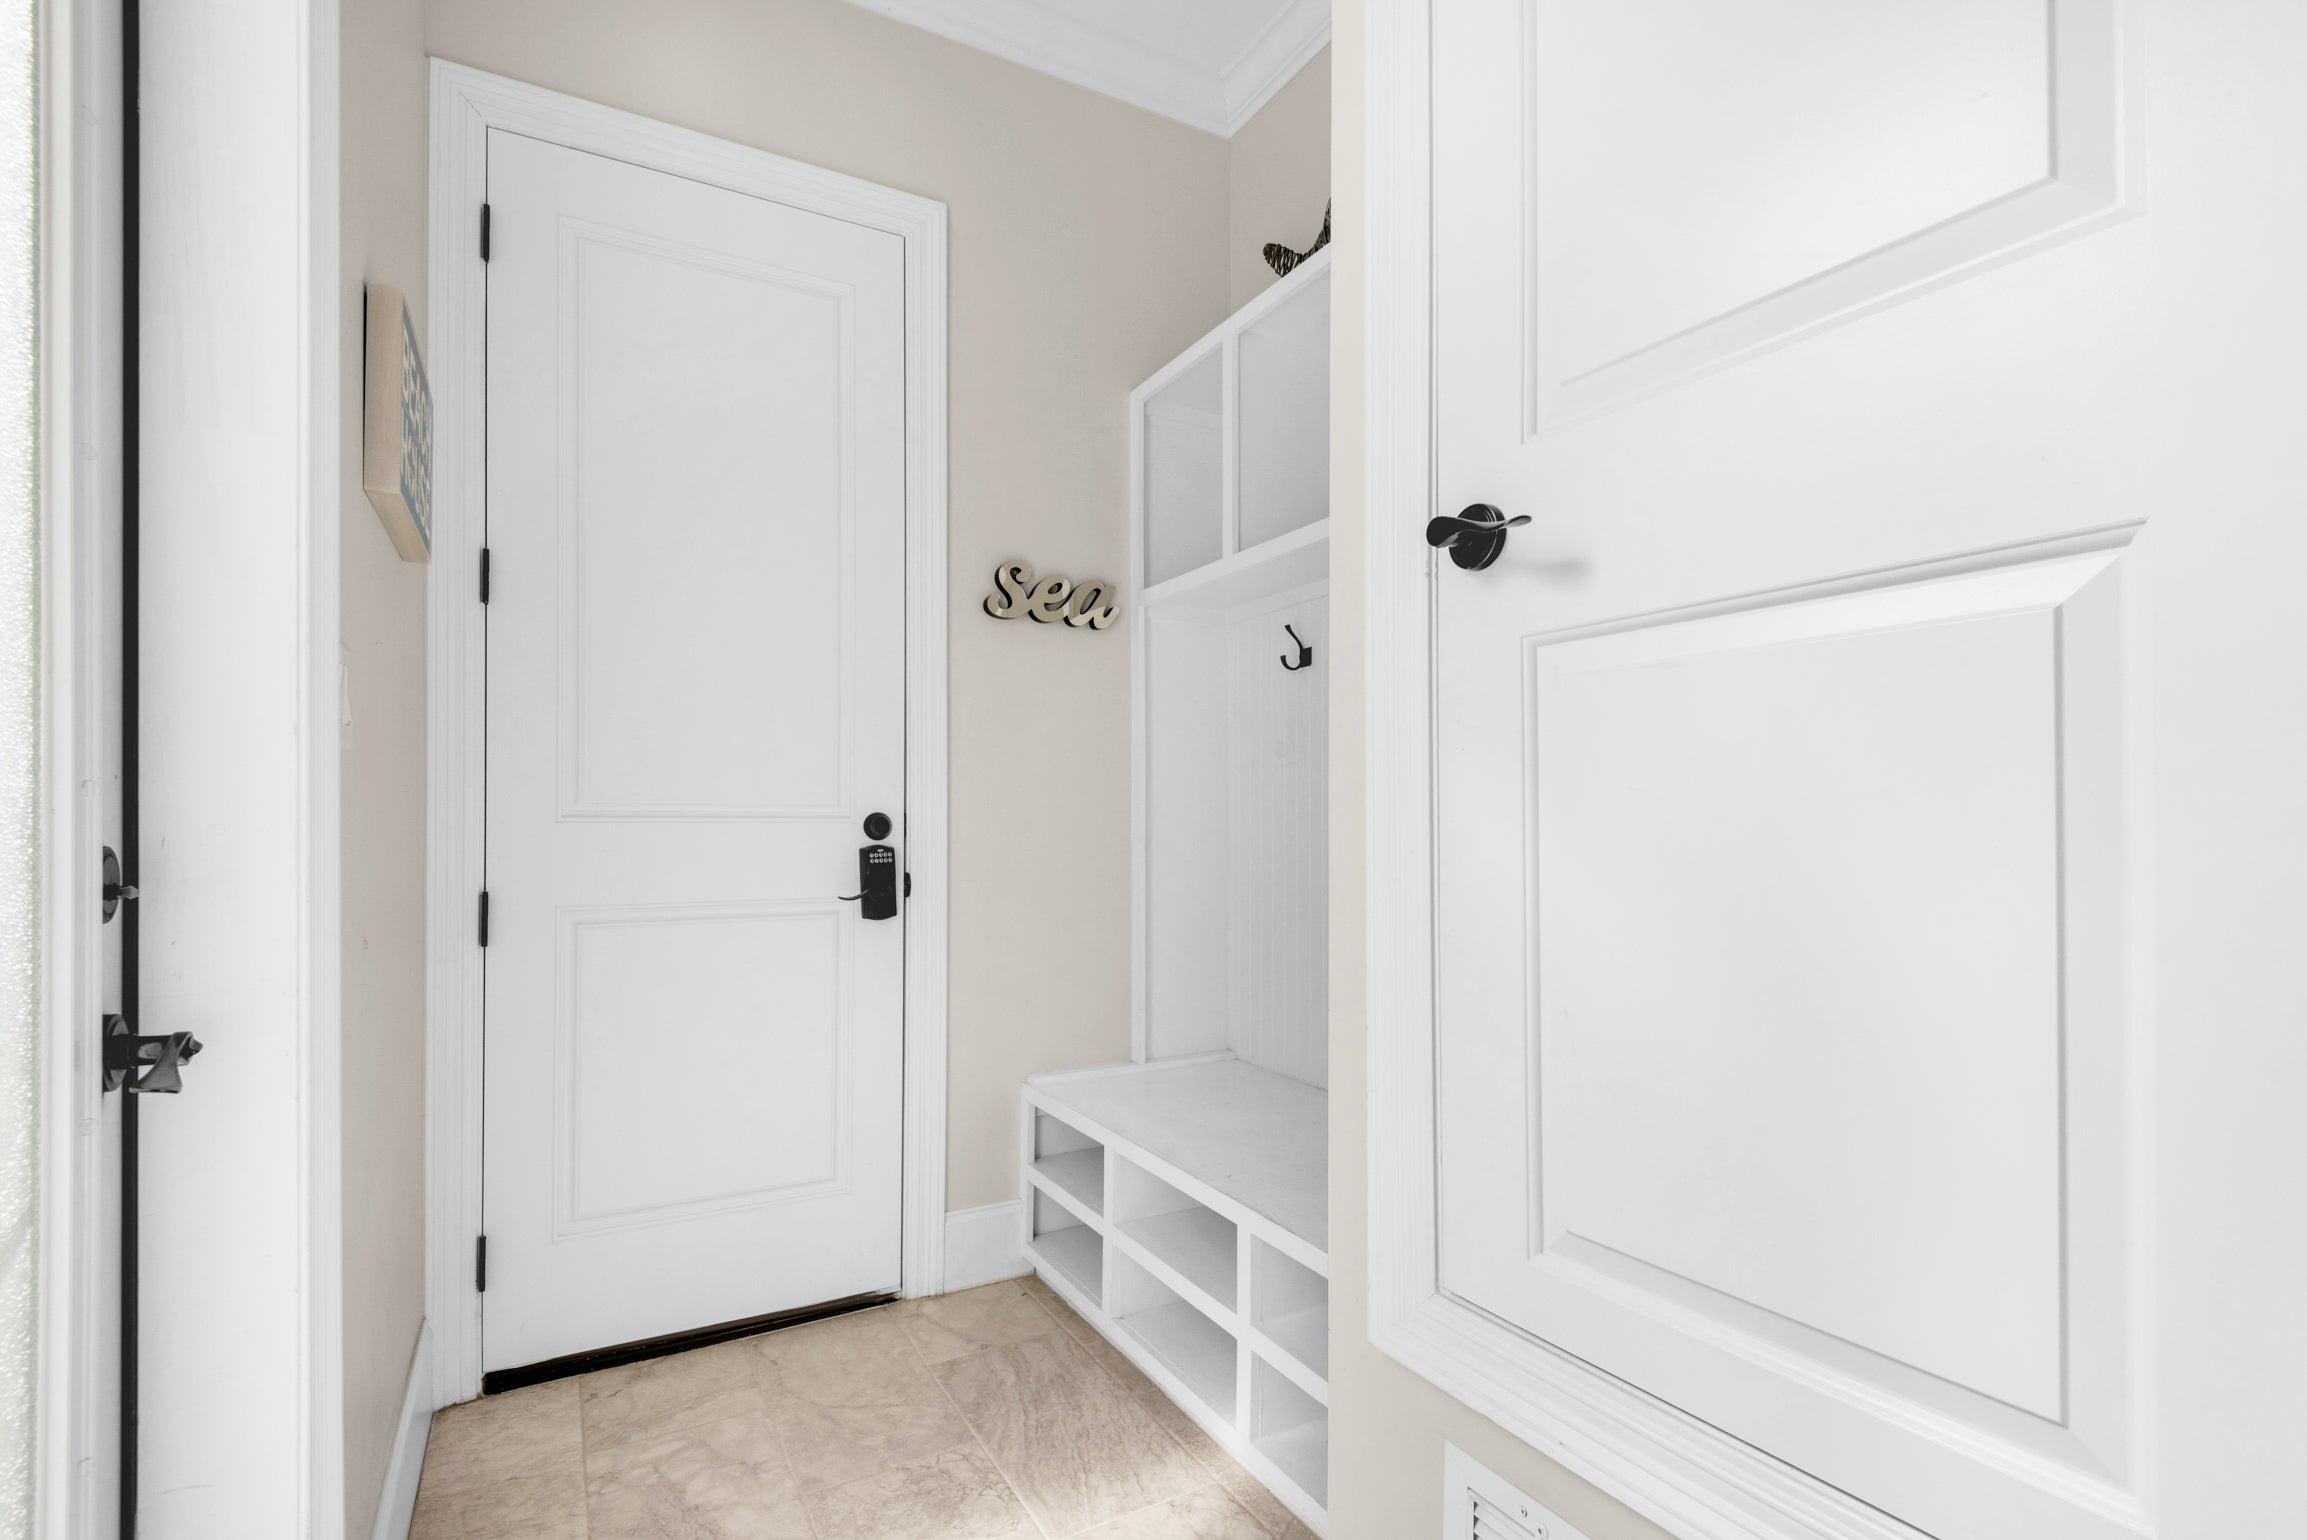 Mudroom to kick off your sandy shoes